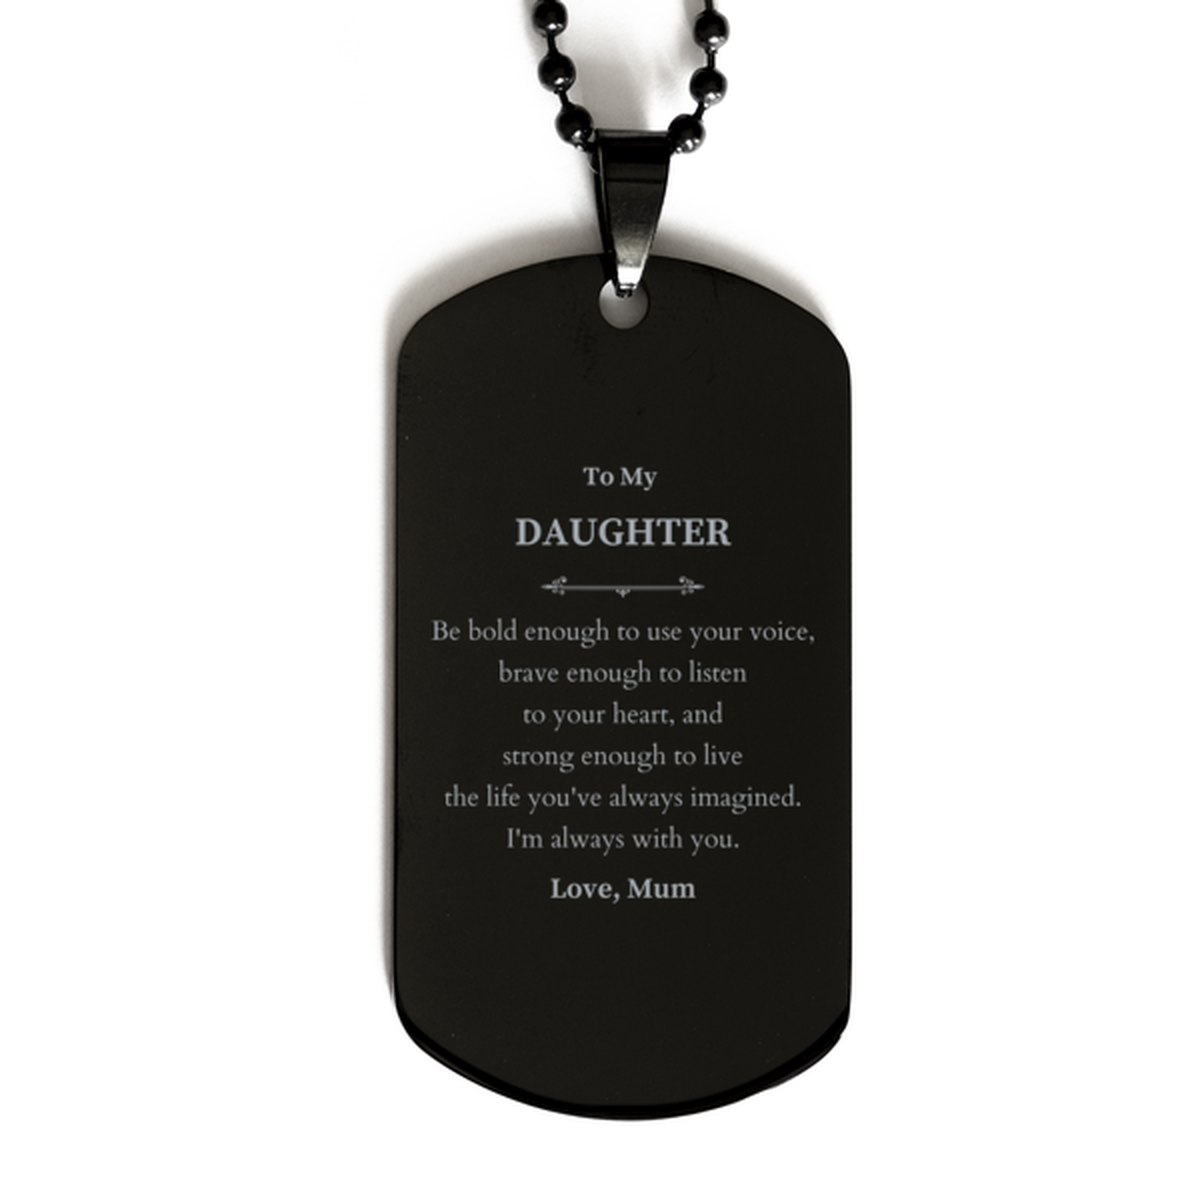 Keepsake Daughter Black Dog Tag Gift Idea Graduation Christmas Birthday Daughter from Mum, Daughter Be bold enough to use your voice, brave enough to listen to your heart. Love, Mum